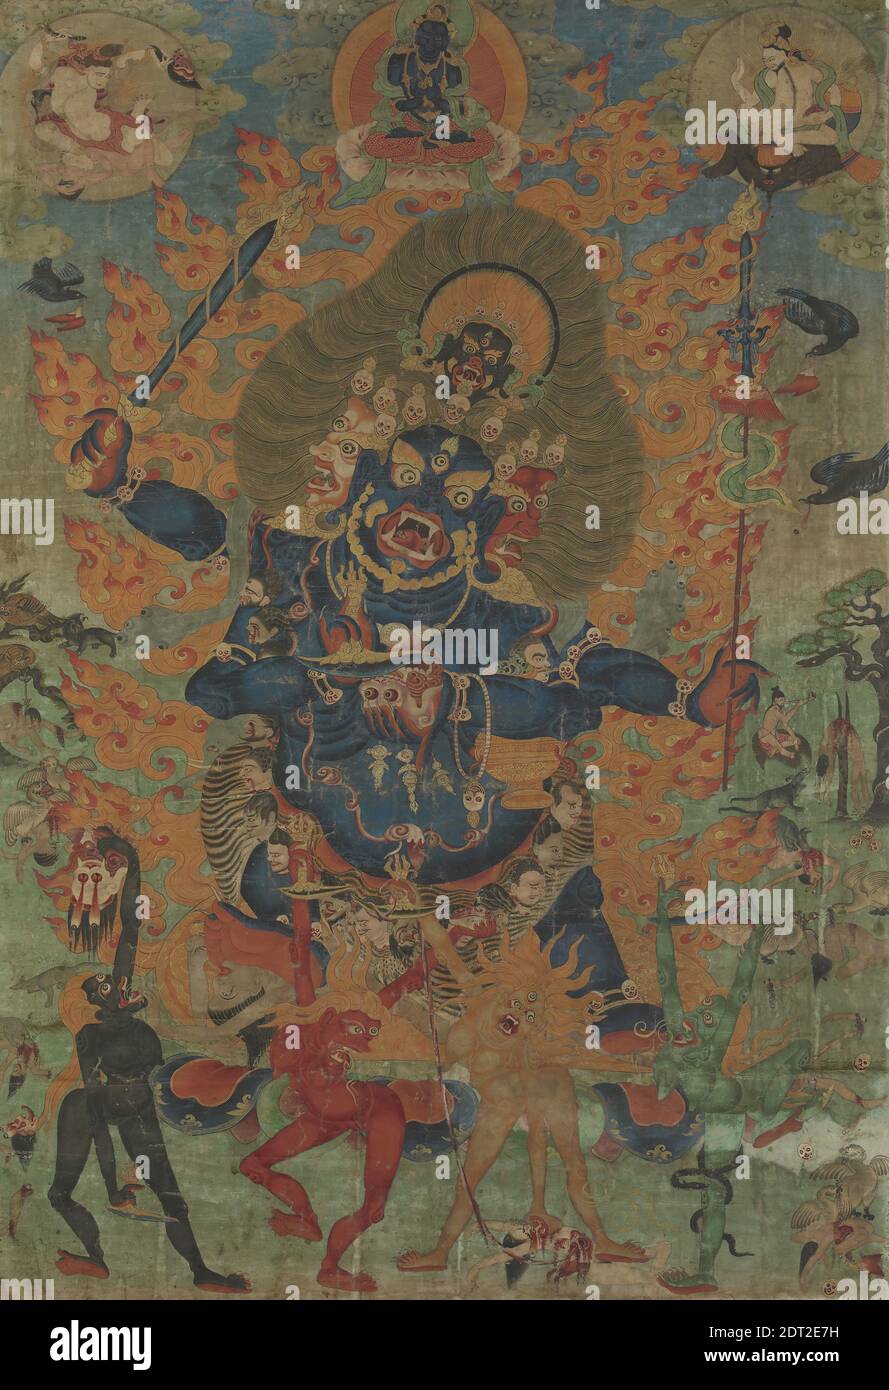 Four-Faced Wrathful Protector Mahakala as Chaturmukha Mahakala, 19th century, Tangka, ink and color on cloth, Further research needed, Mahakala is an emanation of Manjushri, the Bodhisattva of Spiritual Wisdom. He is often shown with four faces in different colors, four arms, and two legs, and he wears a belt of human heads and a tiger skin. The four women dancing in the foreground represent dakinis, heavenly women who may act as muses for spiritual attainment. Here, their ungainly appearances and gruesome actions are meant to spur a state of greater consciousness Stock Photo